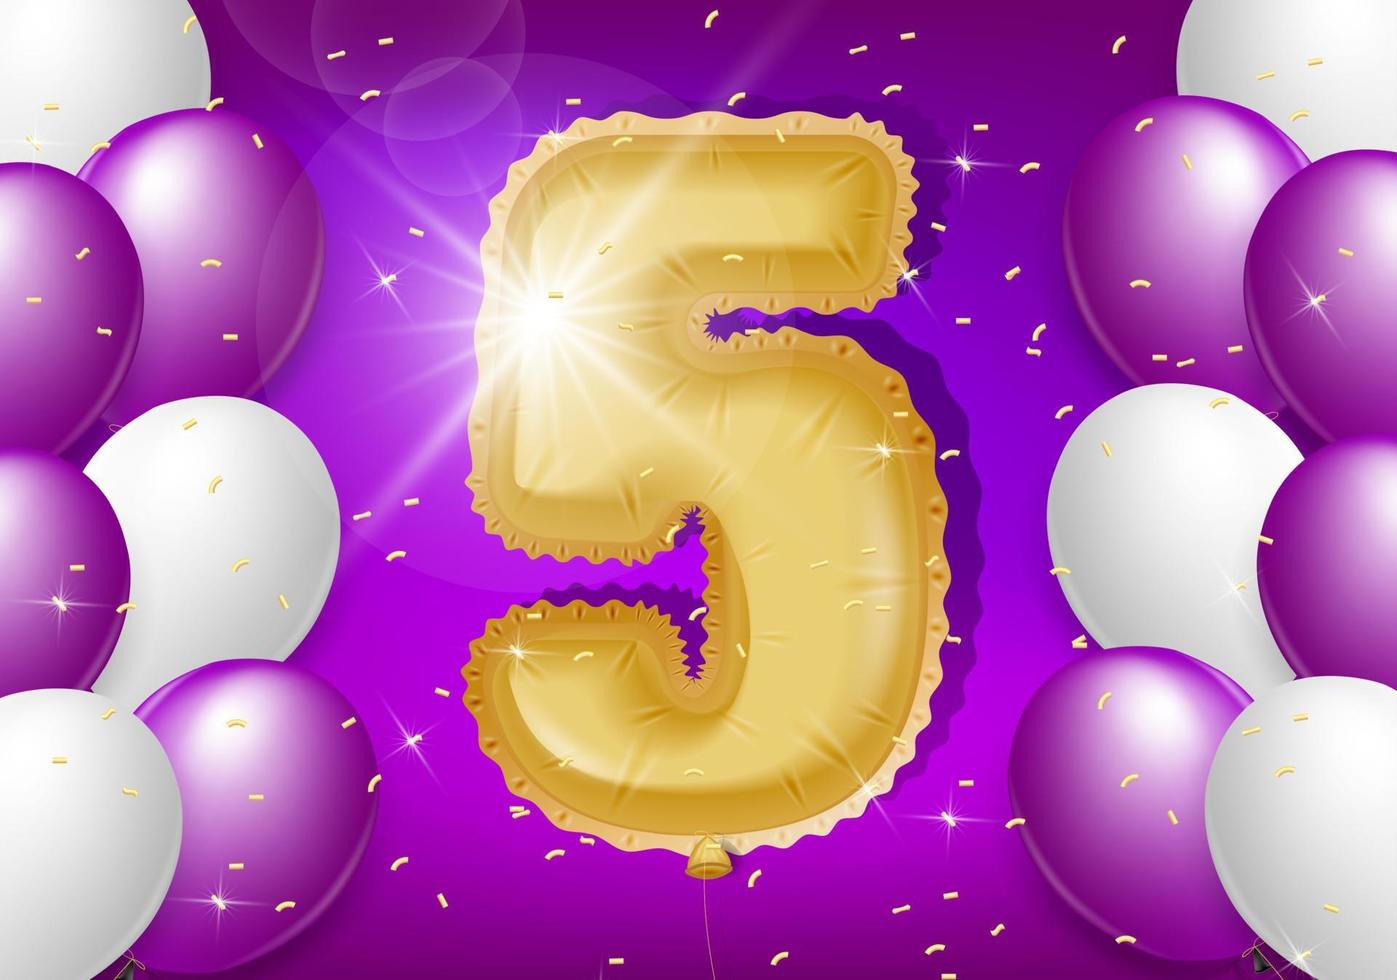 5th year anniversary design with balloons and shiny confetti, design elements for banner, postcard, poster and invitation card. Realistic 3d vector